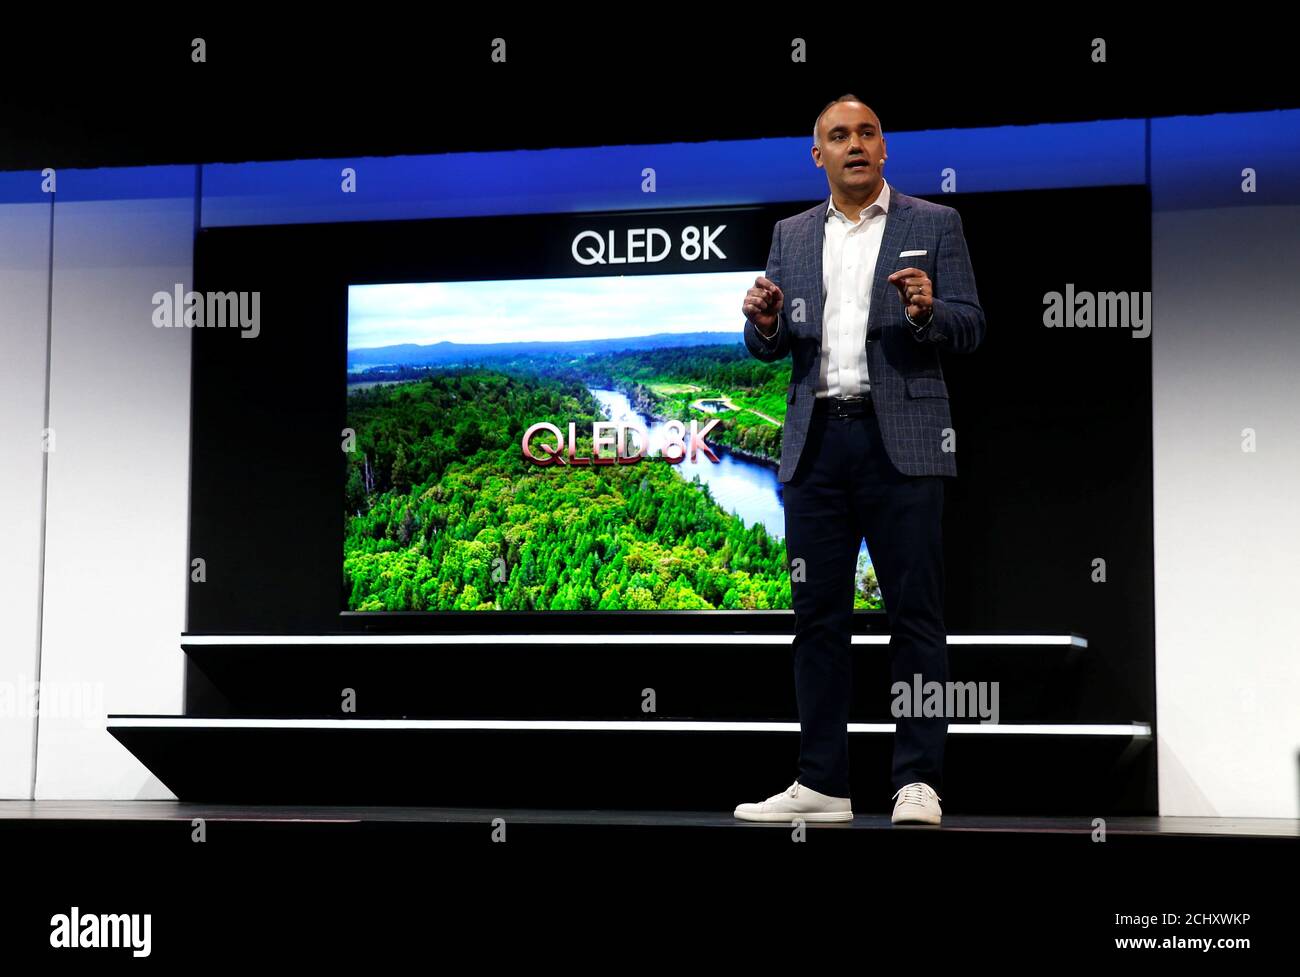 Dave Das, senior vice president of consumer electronics product marketing at Samsung Electronics America, speaks by a 98-inch, QLED 8K smart television during a Samsung news conference at the 2019 CES in Las Vegas, Nevada, U.S. January 7, 2019. REUTERS/Steve Marcus Stock Photo